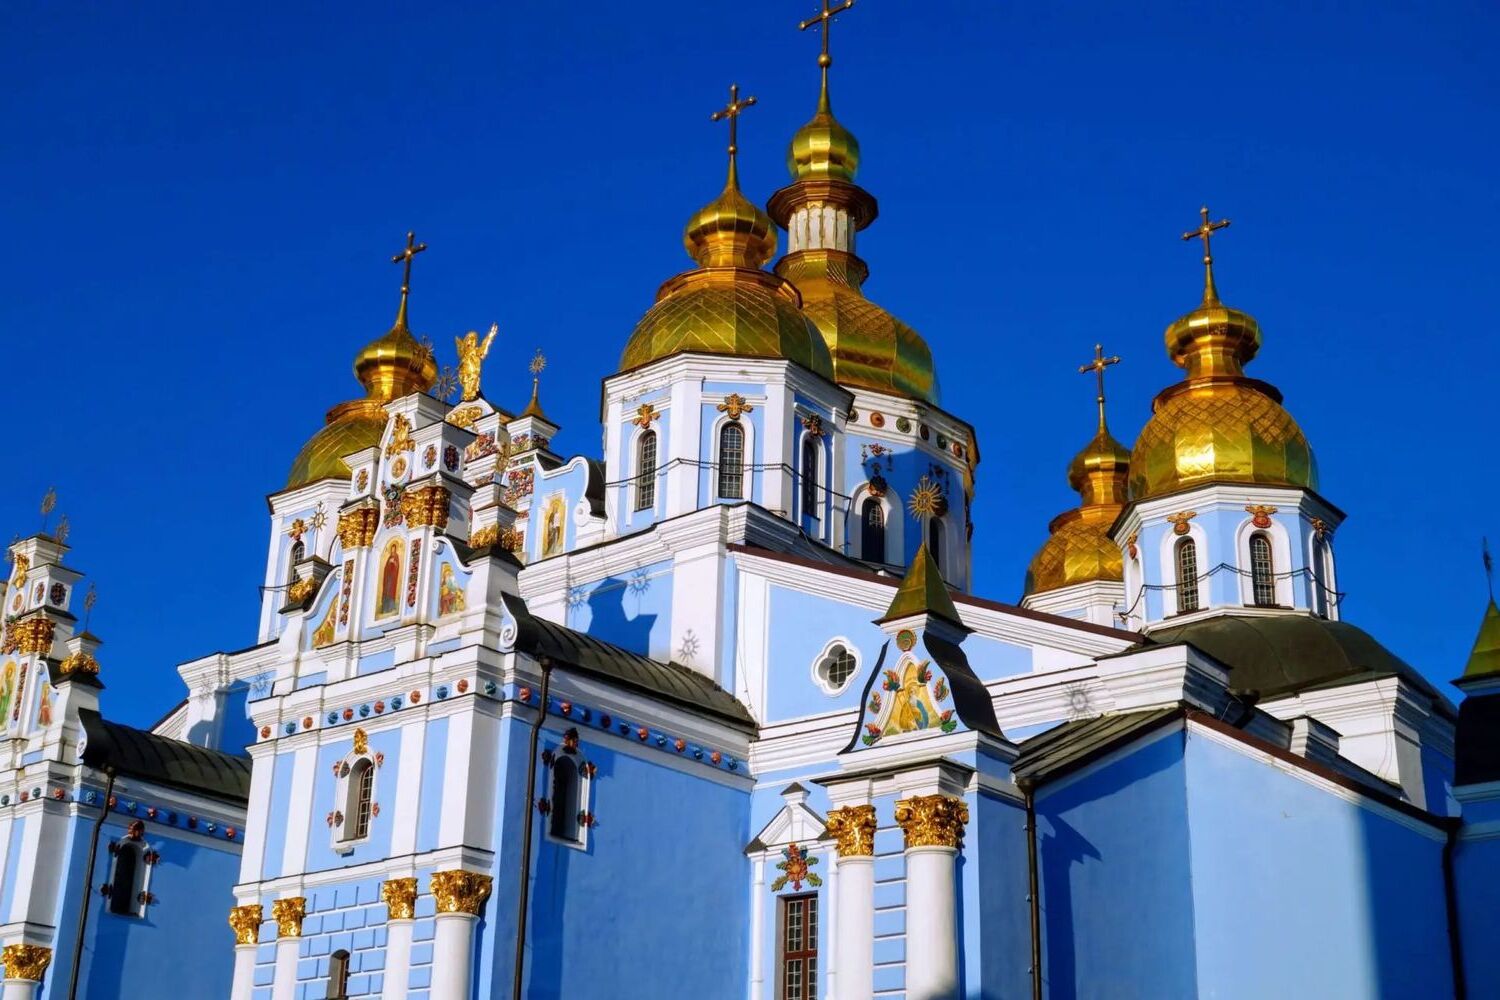 20-facts-about-st-michaels-golden-domed-monastery